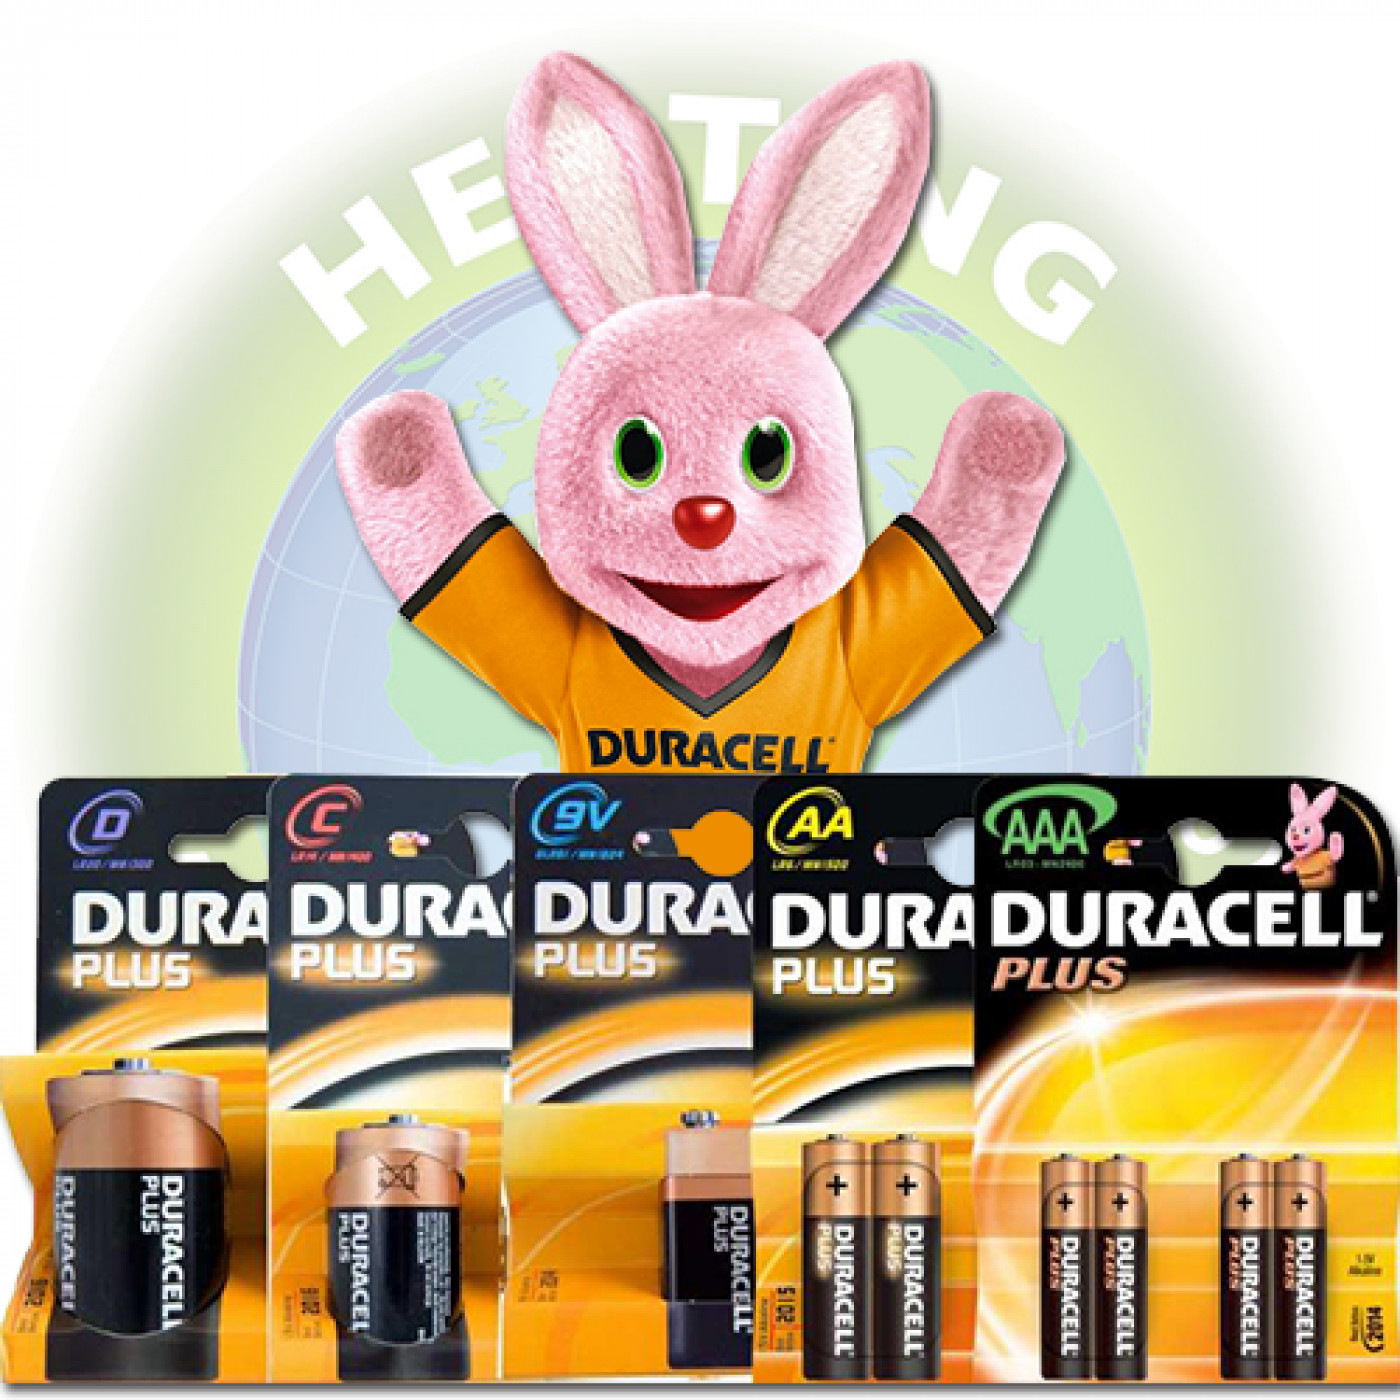 Duracell Plus Power now at HWOS!